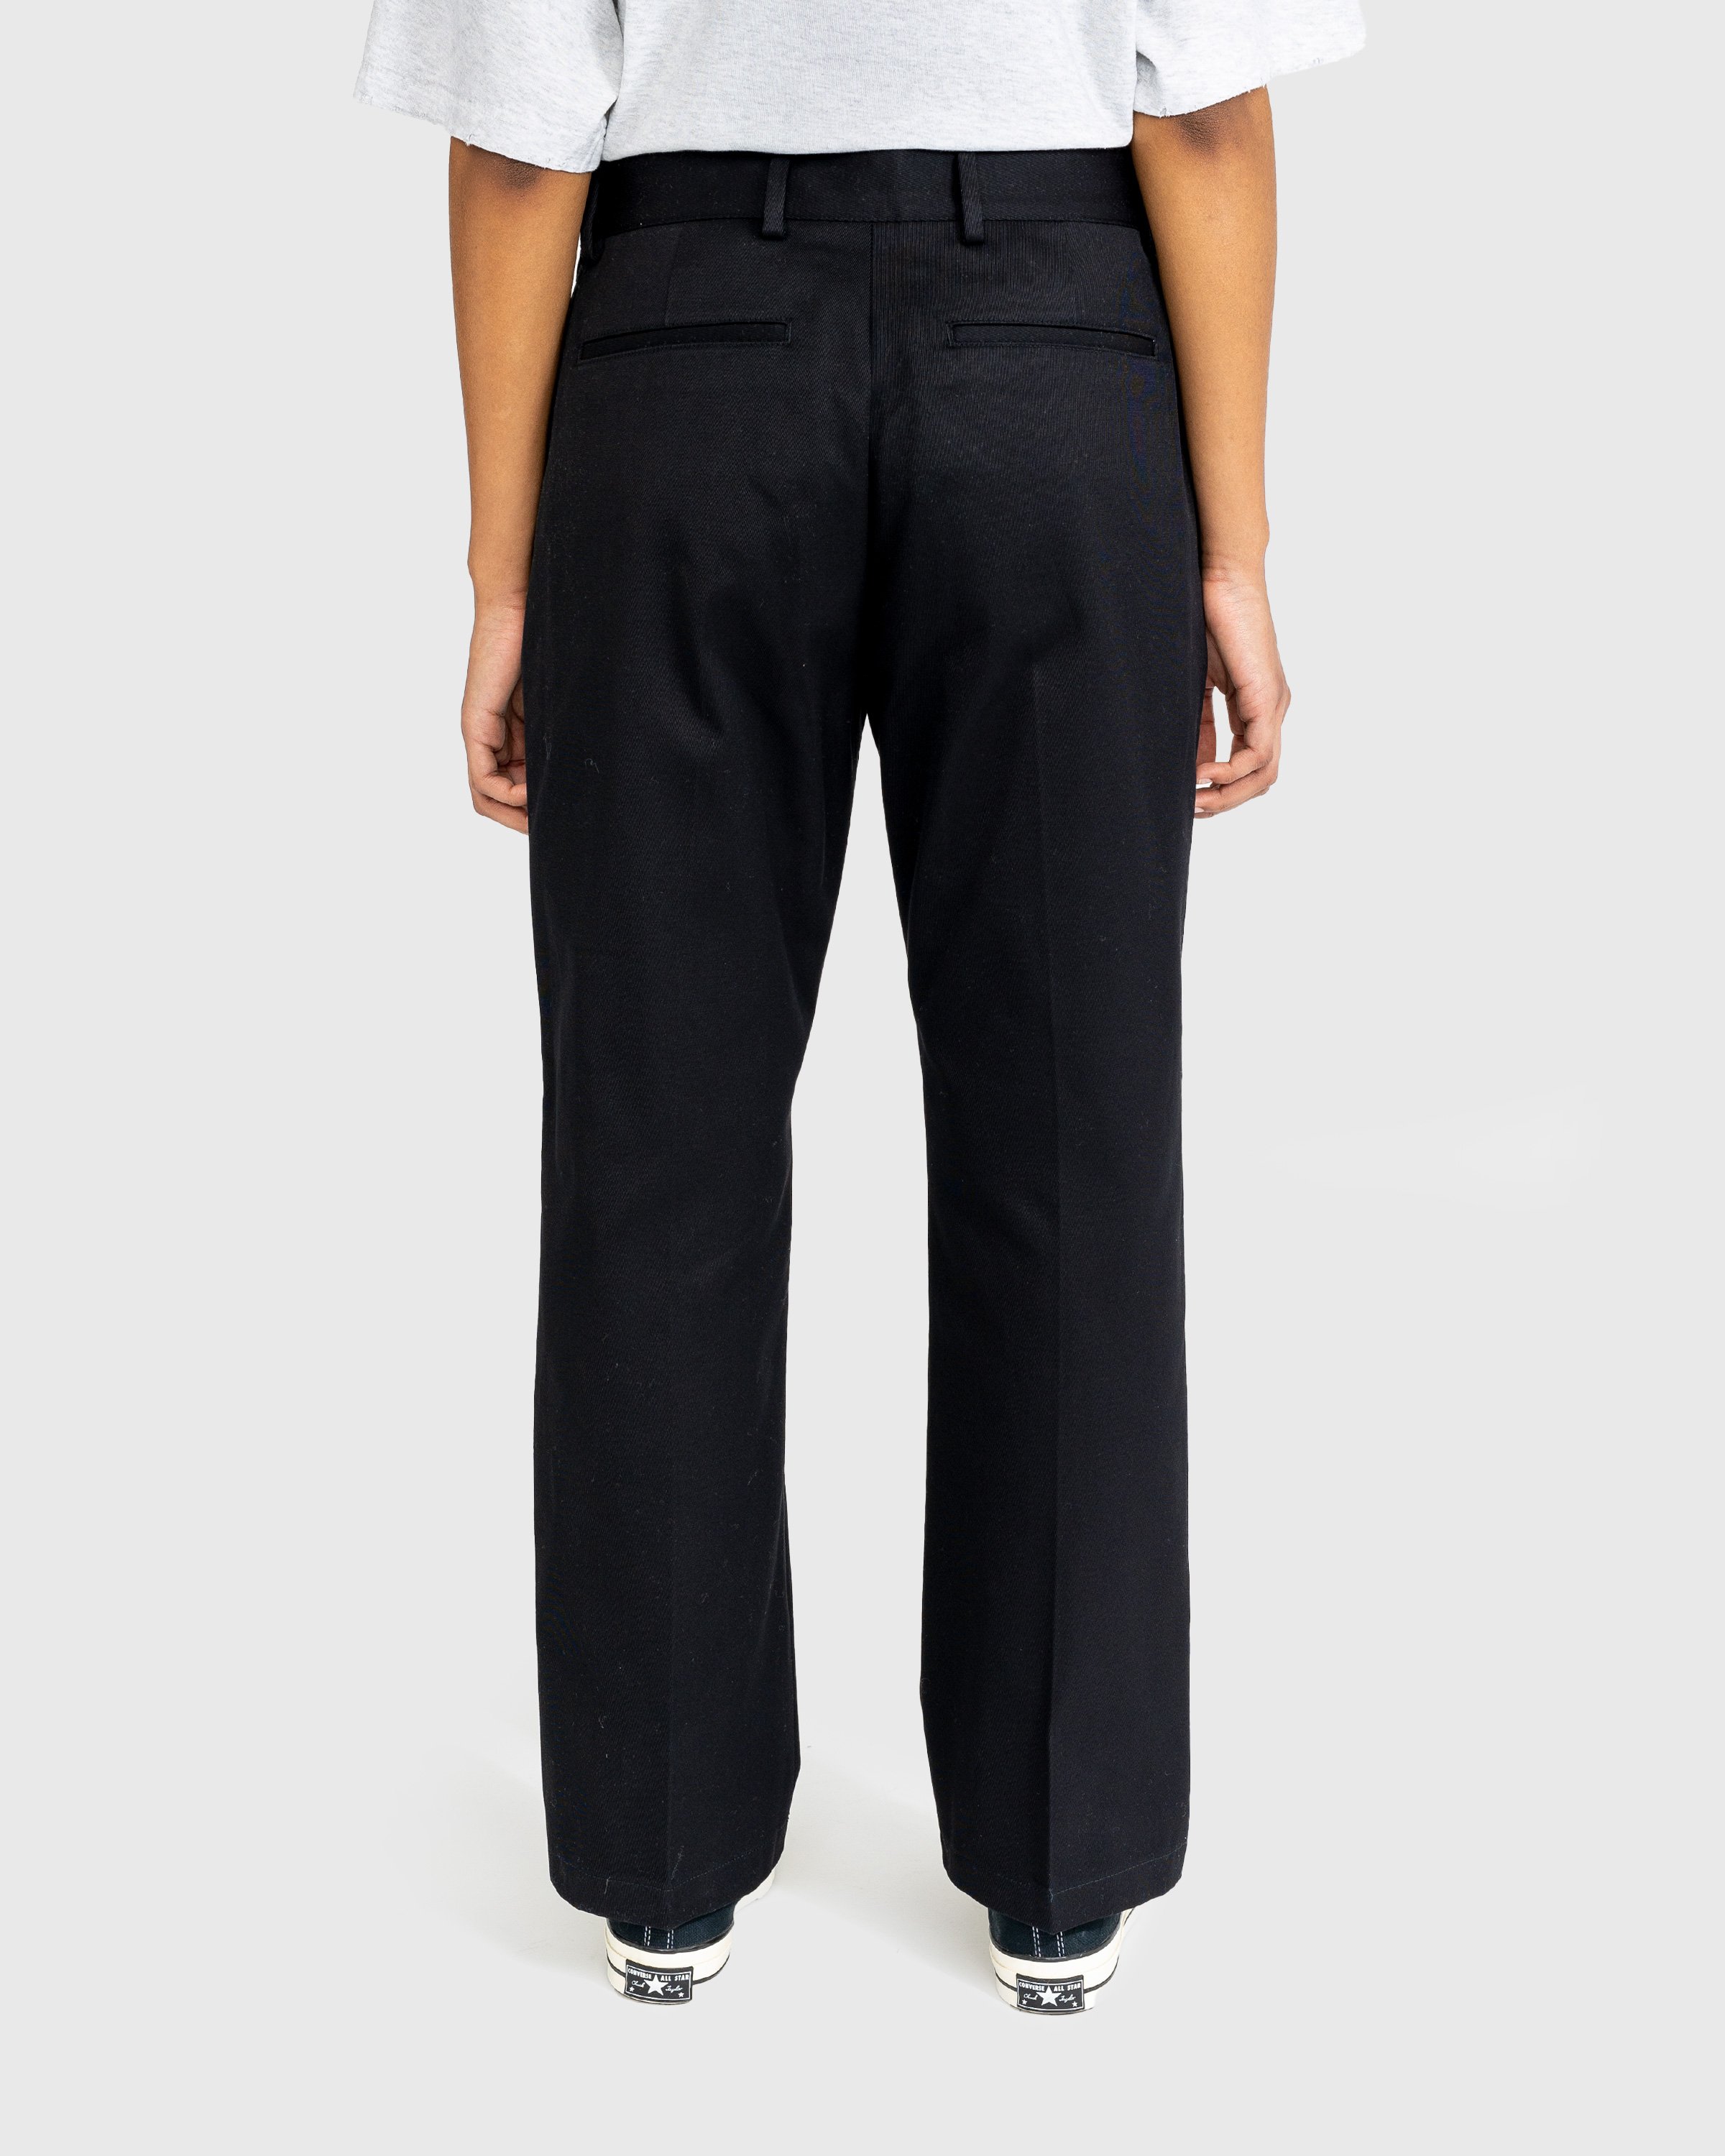 Acne Studios - Wool Blend Tailored Trousers Black - Clothing - Black - Image 3